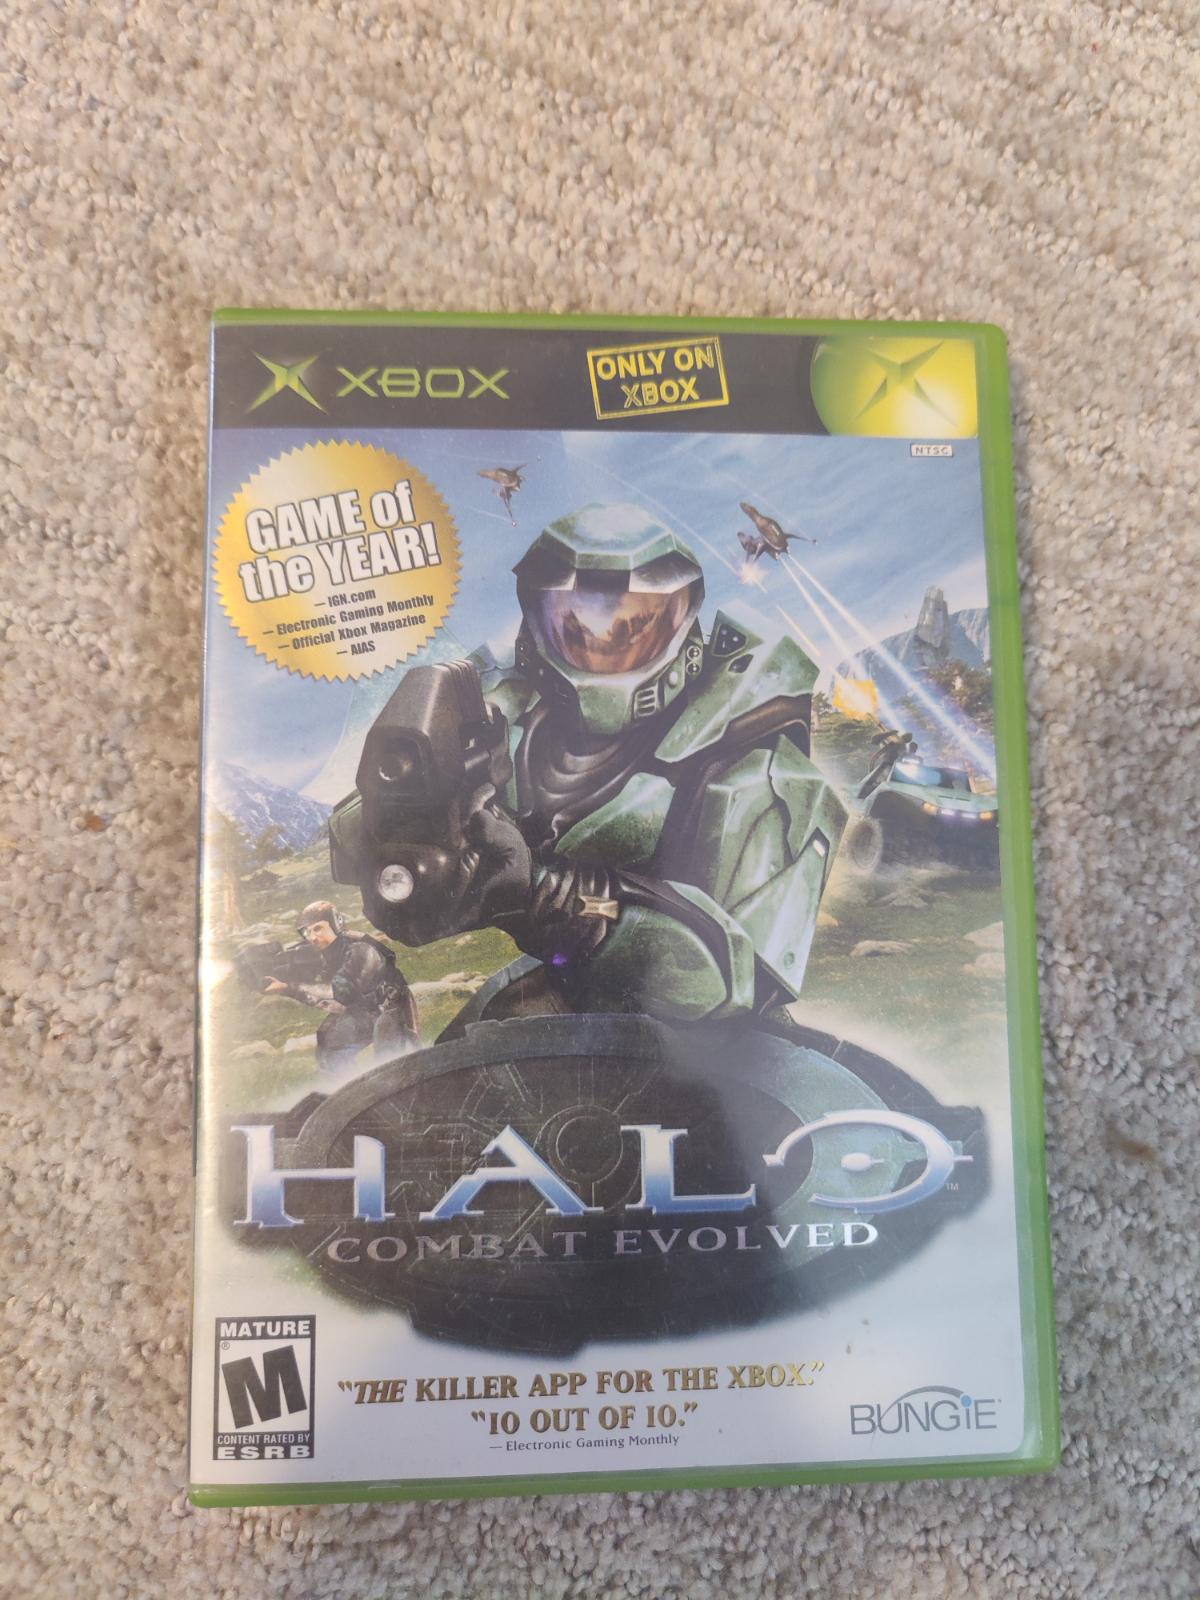 Halo: Combat Evolved [Game of the Year] | Item, Box, and Manual | Xbox